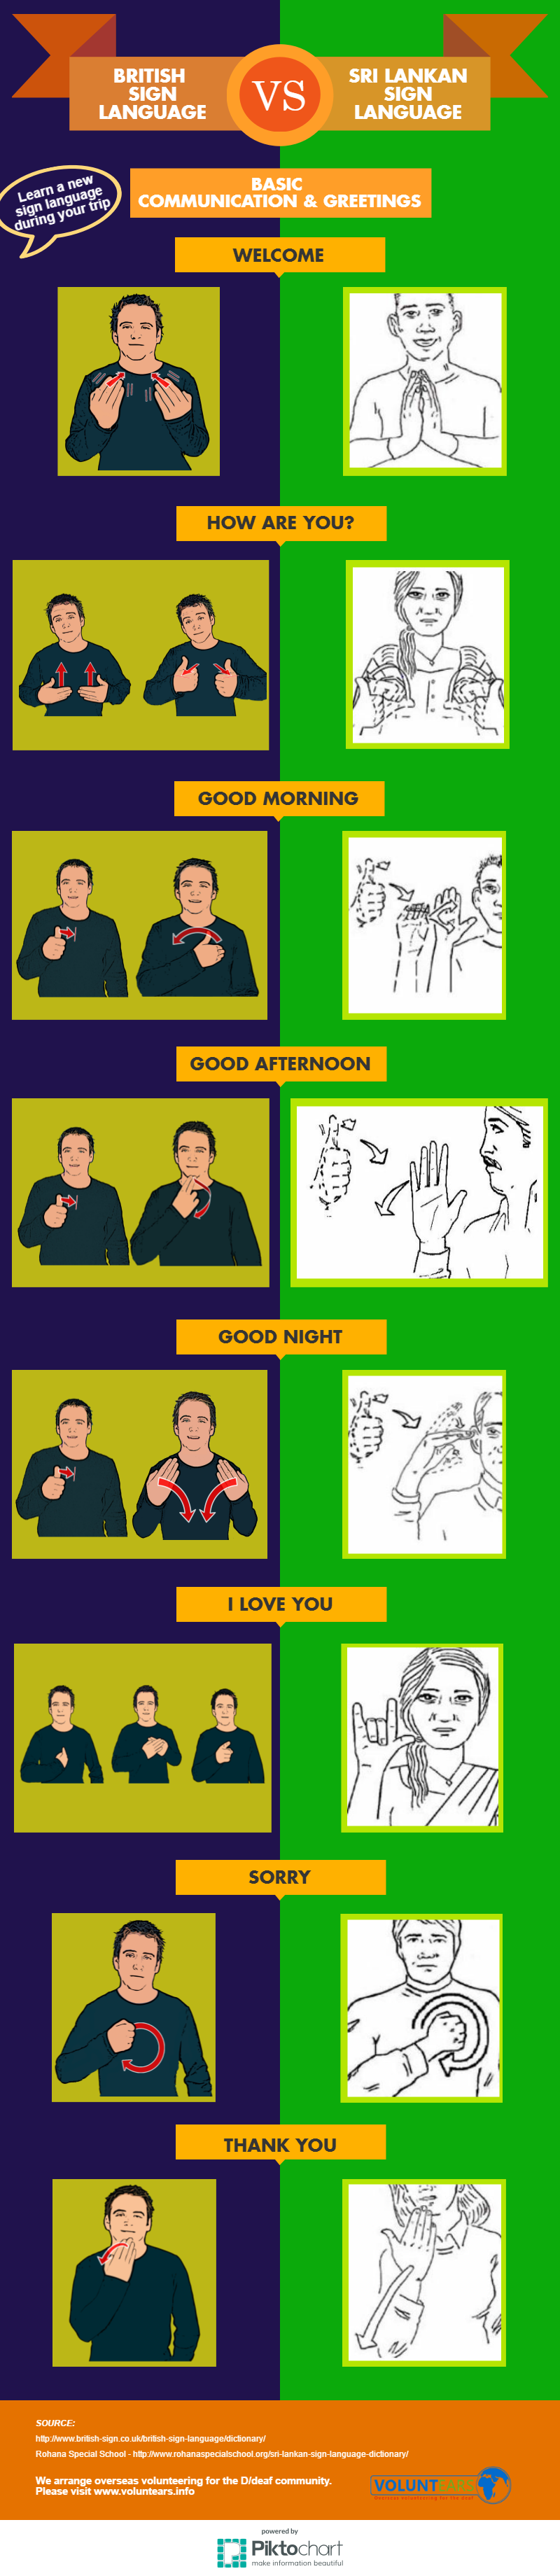 BSL & Sri Lankan sign language - what’s the difference?